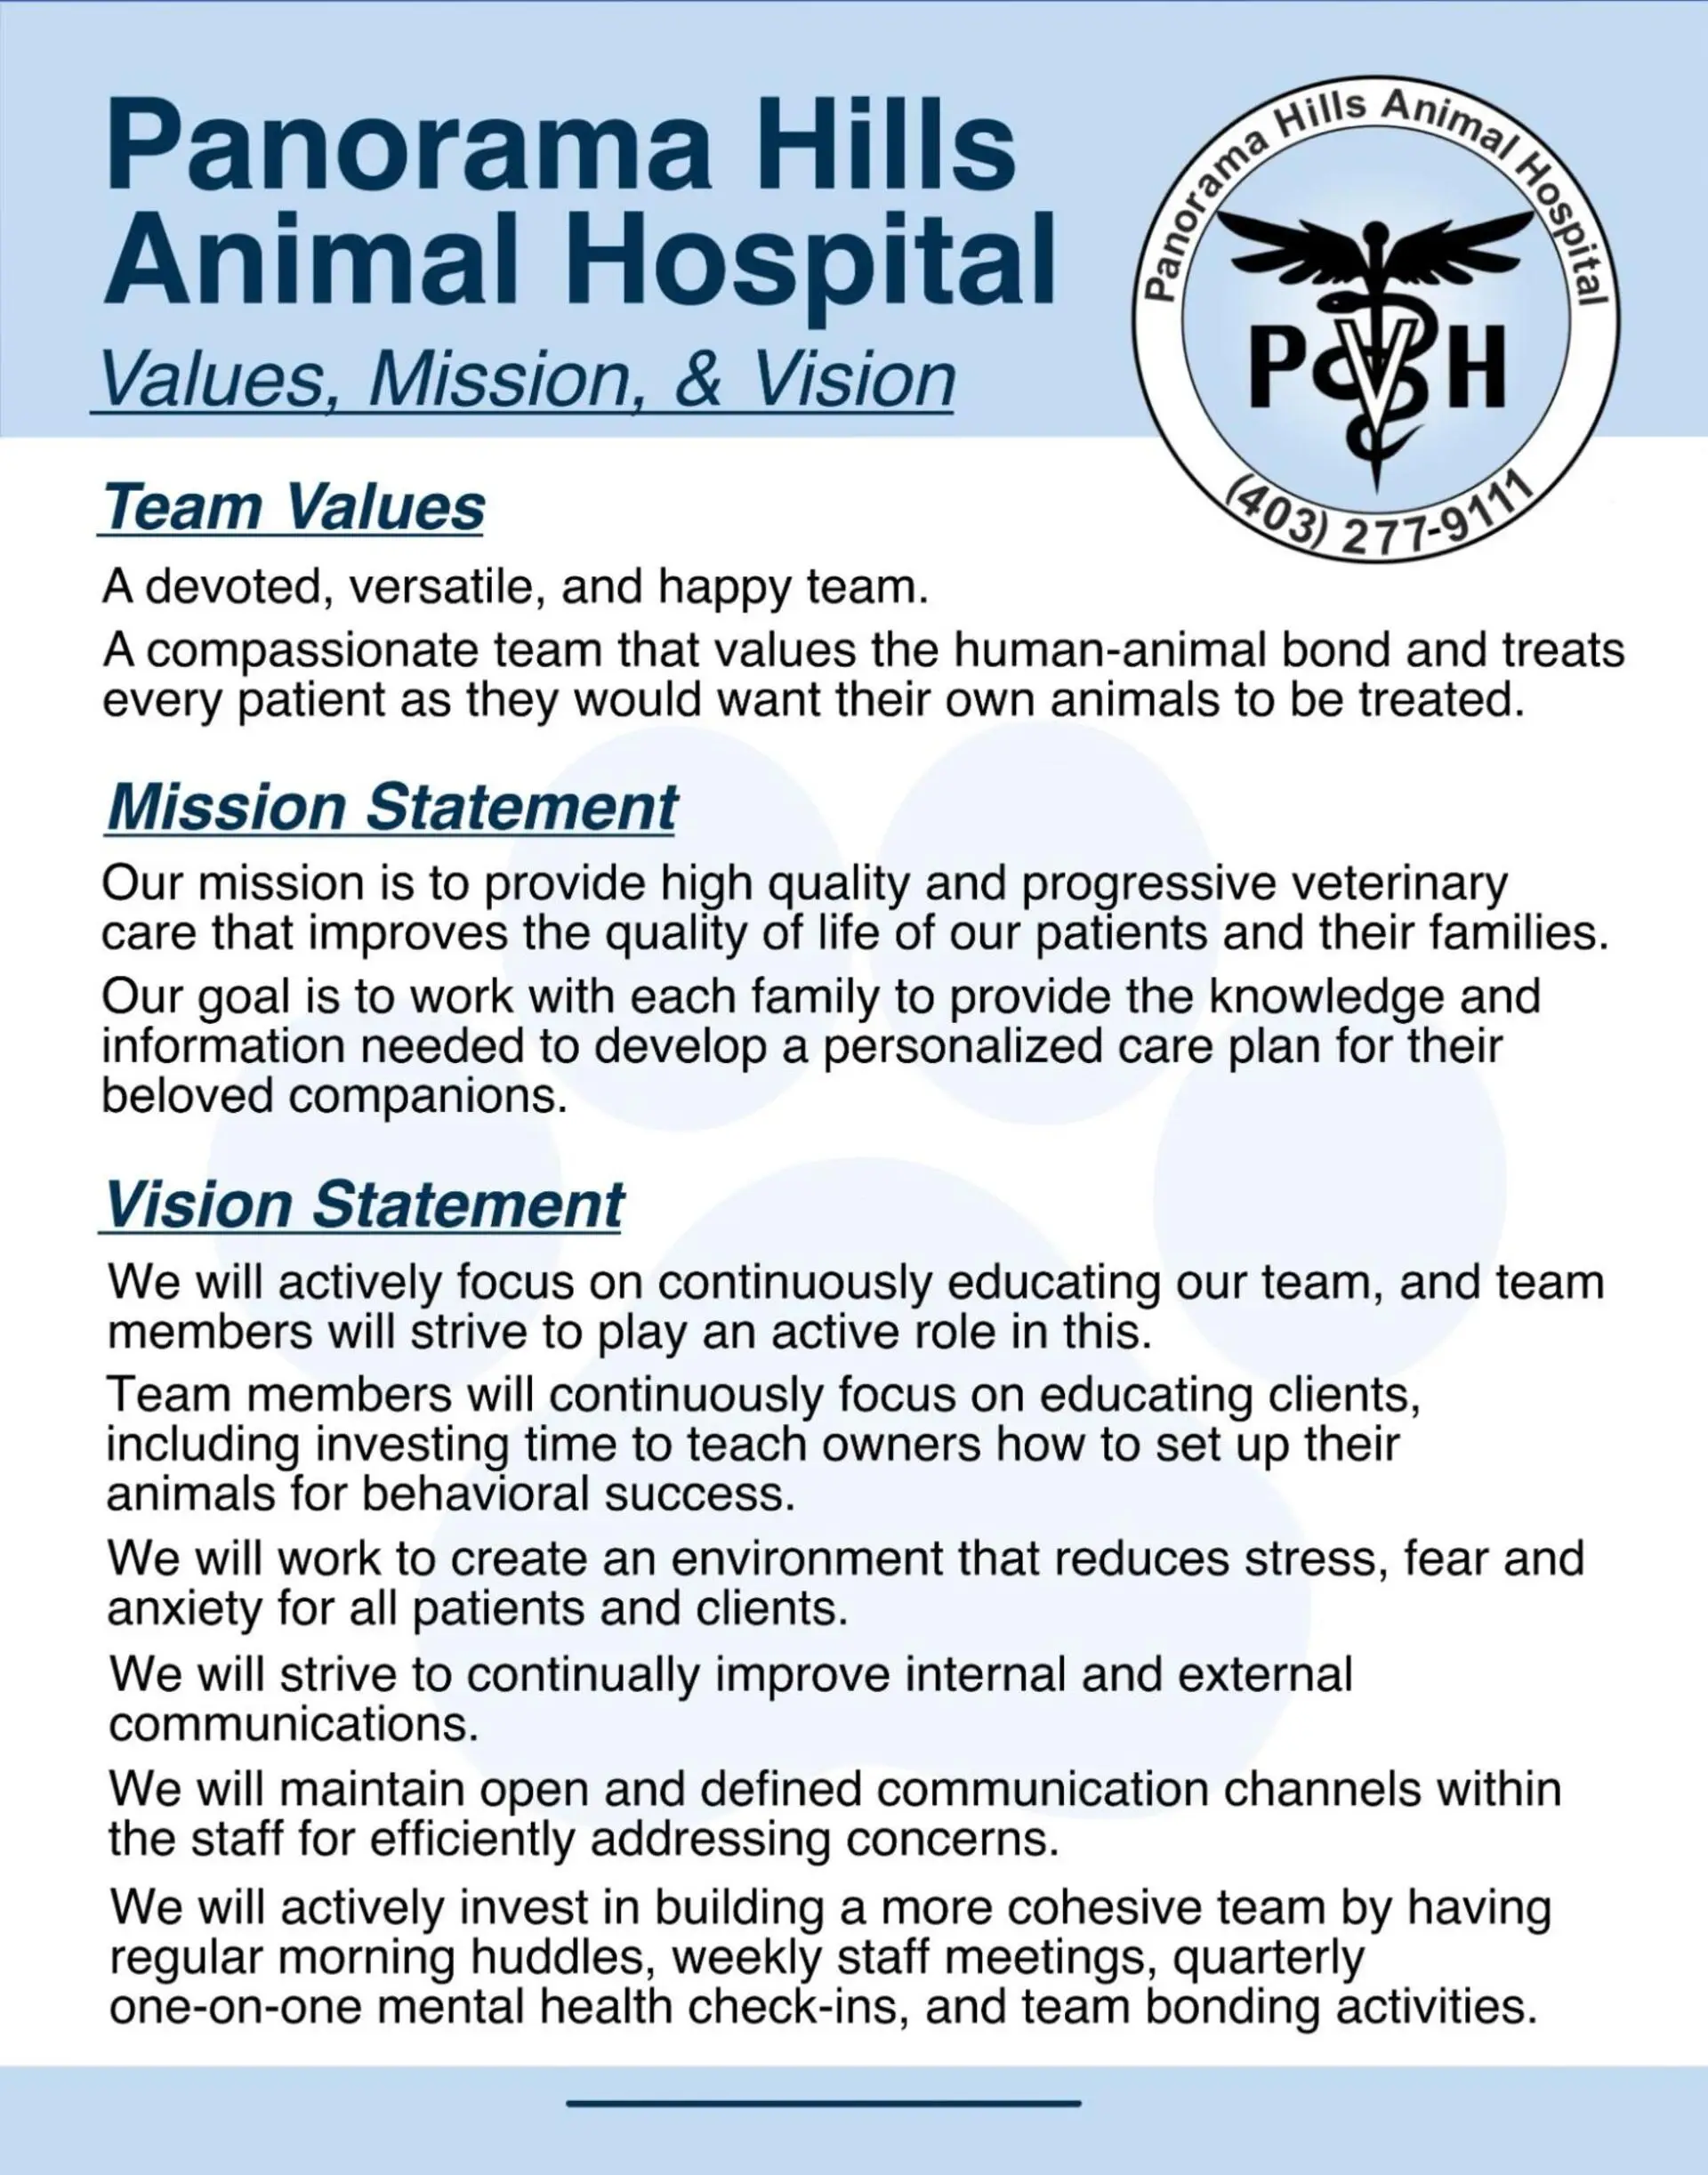 Panorama Hills Animal Hospitals Values, Vision,
                        and Mission